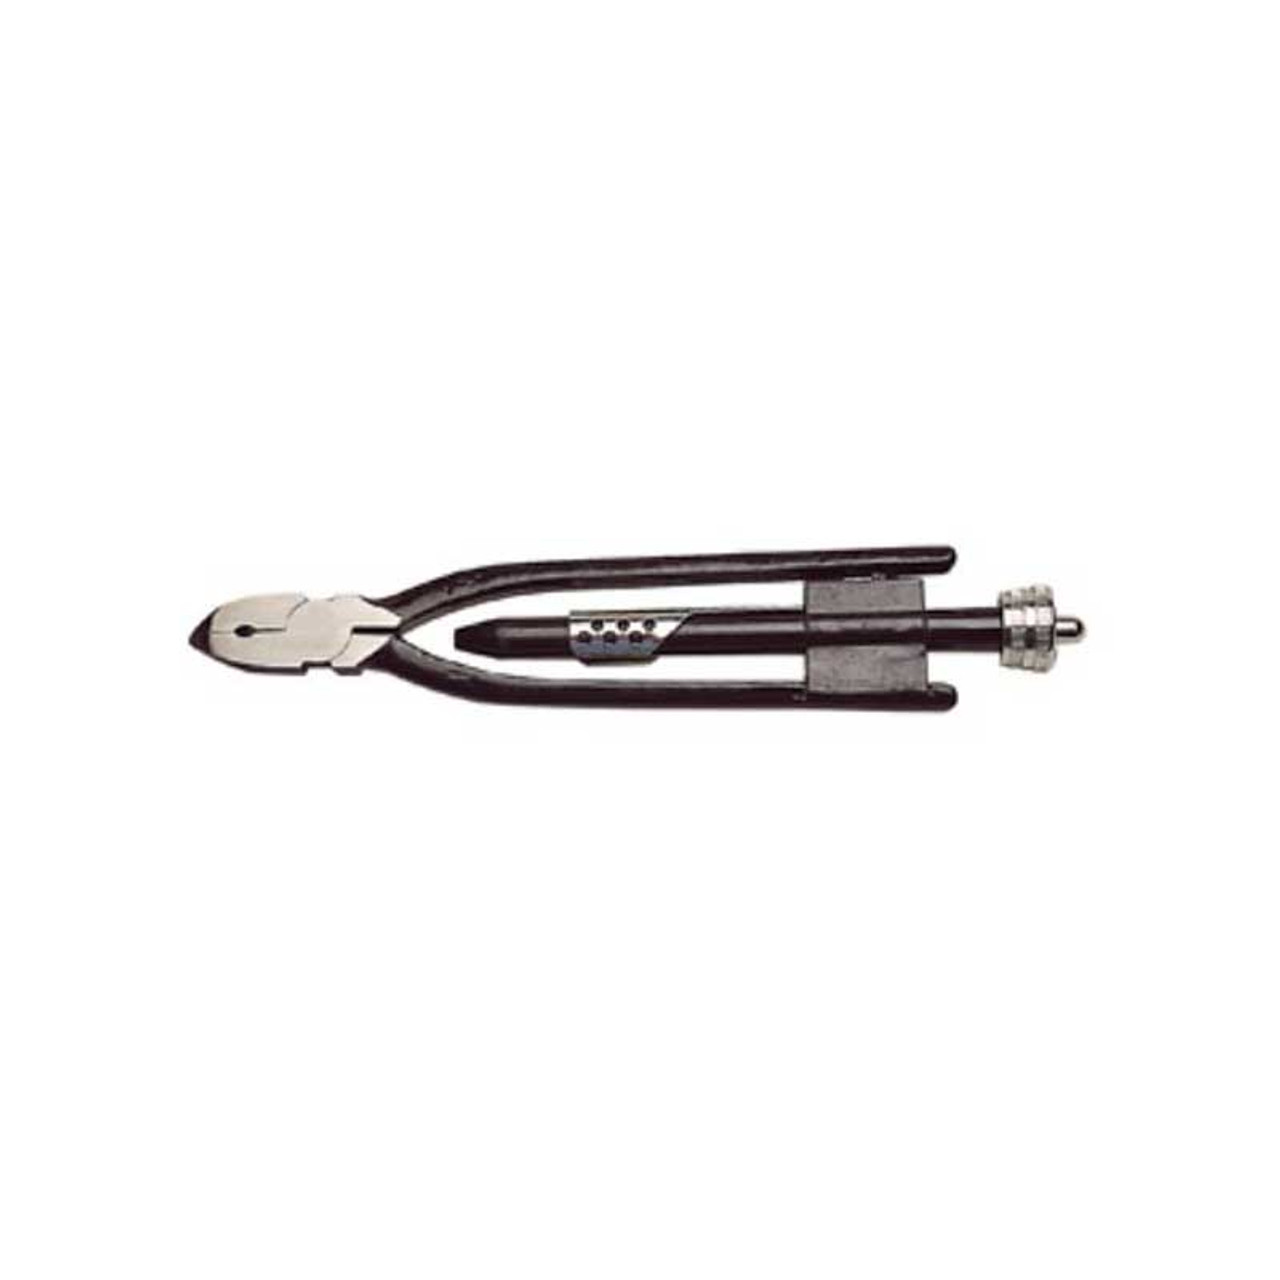 Wire Twisting Pliers 6 Inches Jewelry Tool | Esslinger